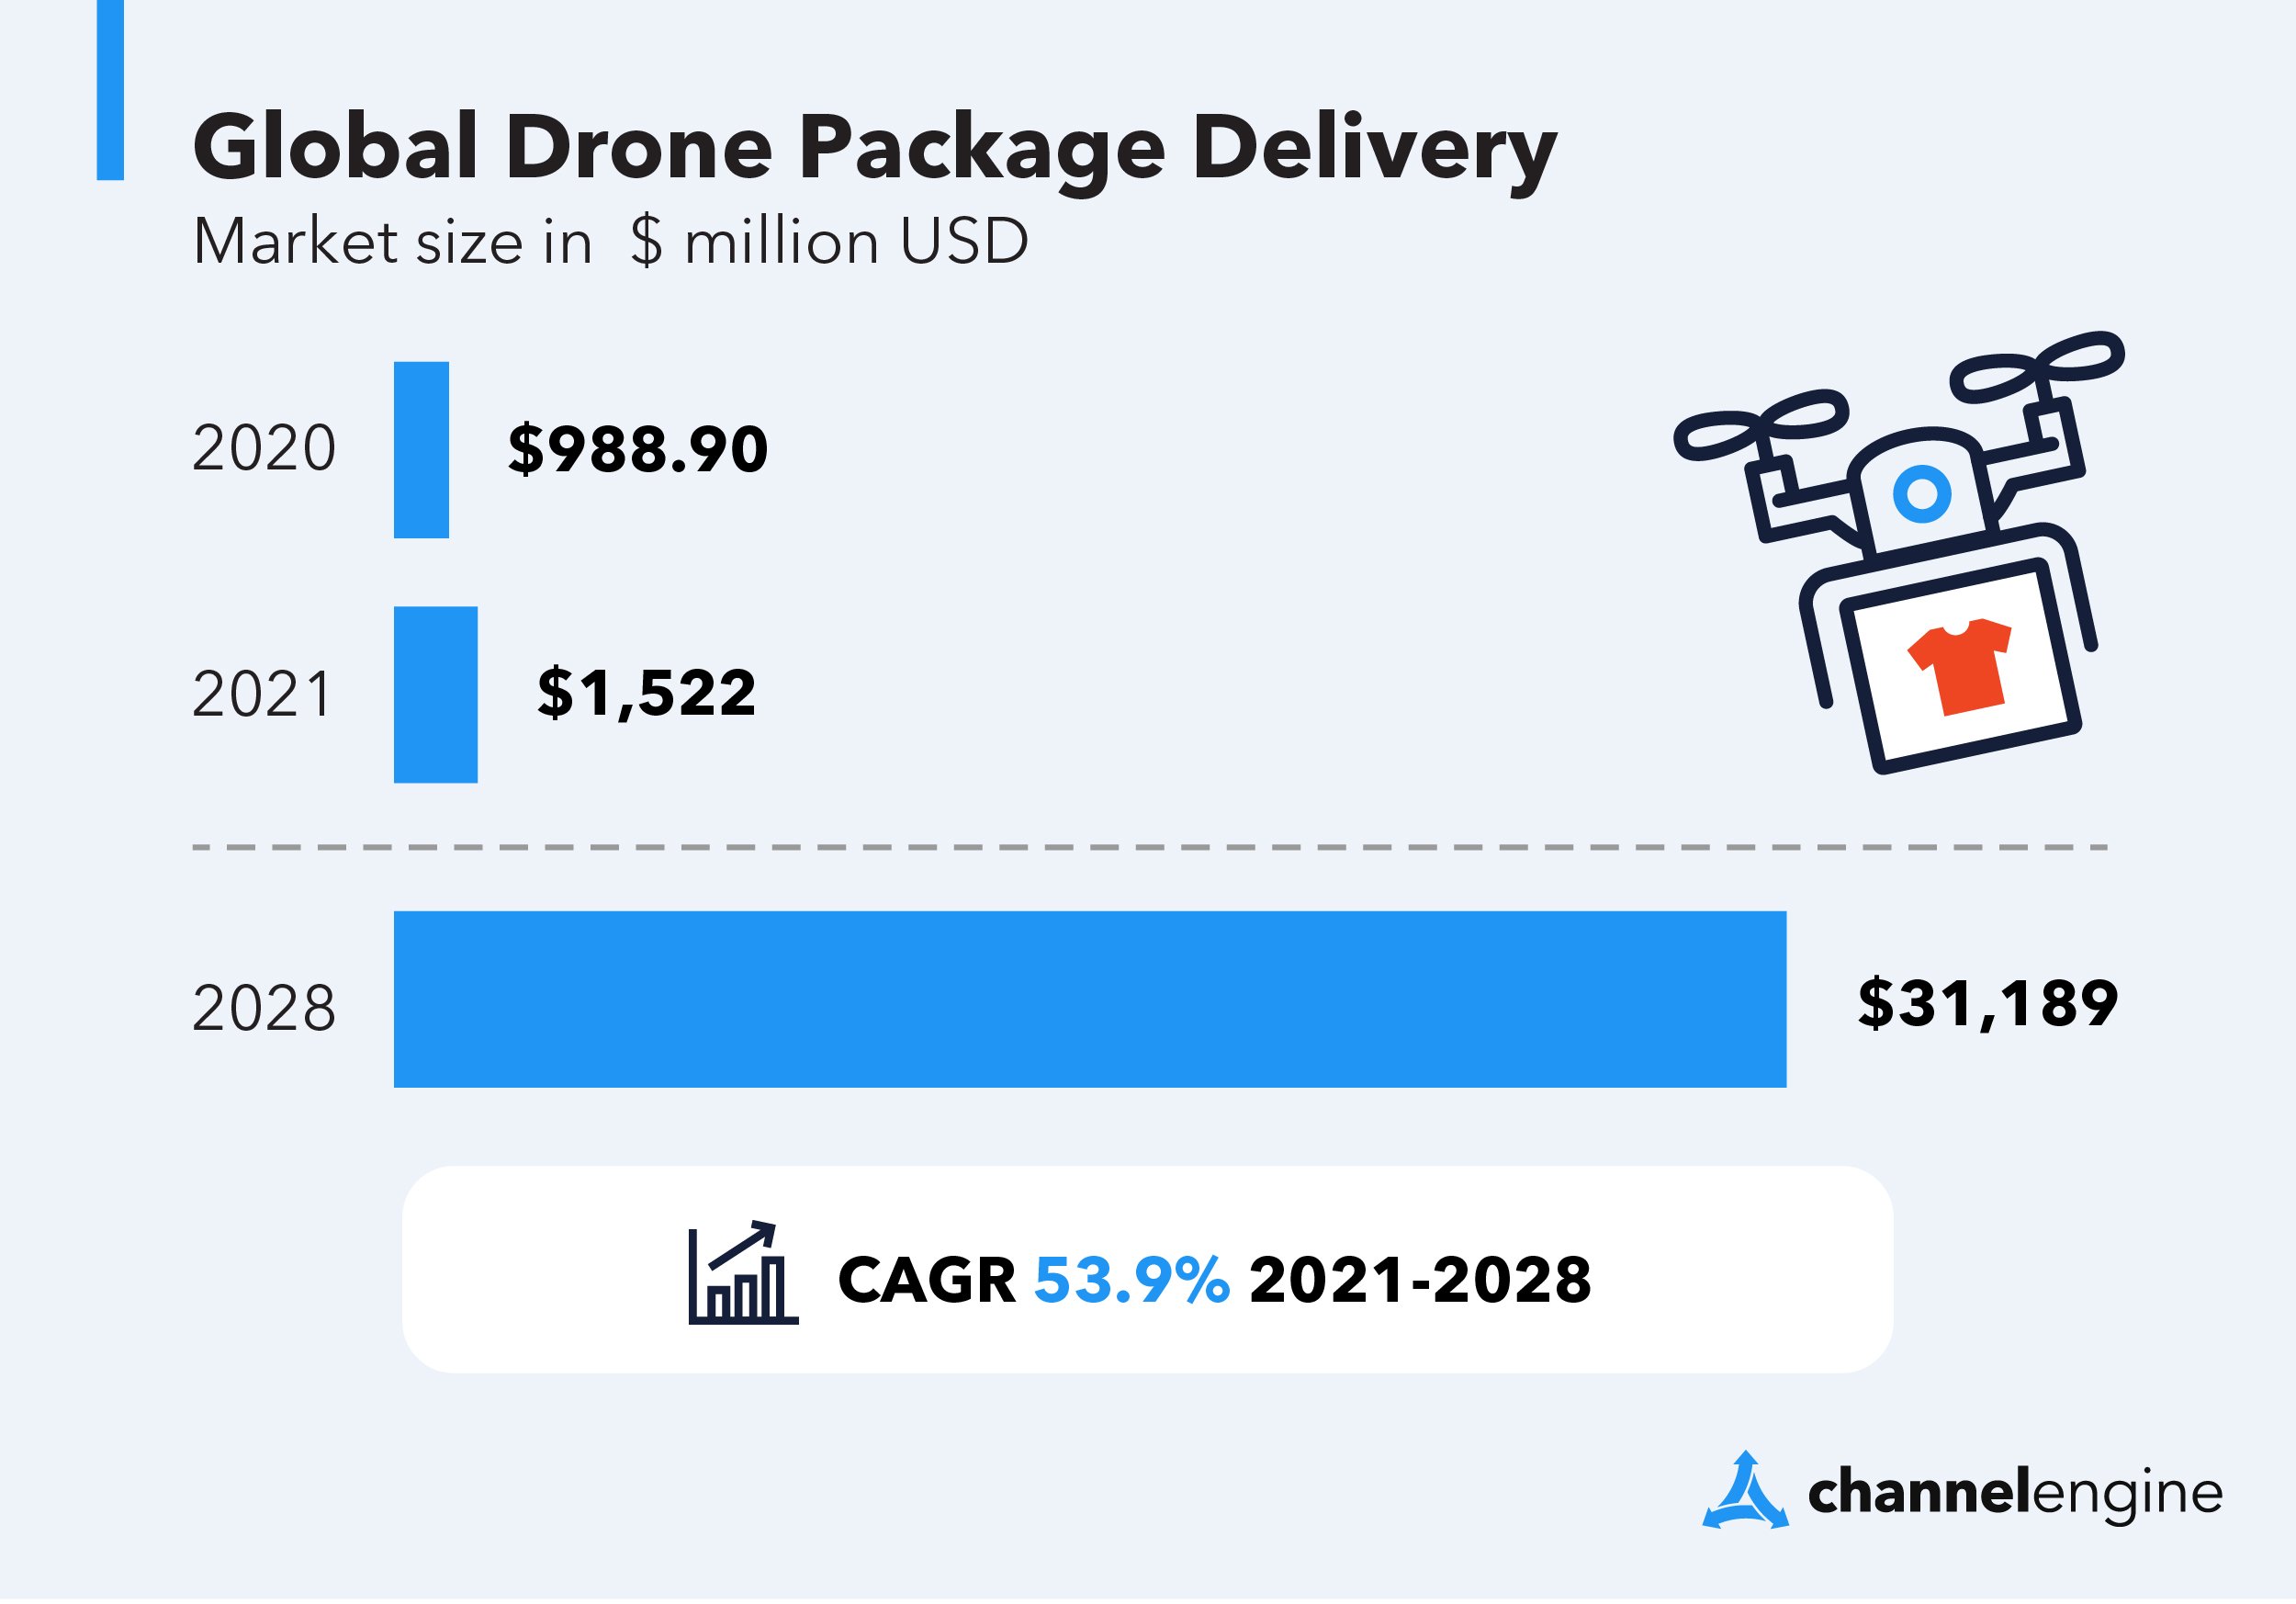 Drone deliveries are increasing rapidly at a rate of 53.9% CAGR to 2028